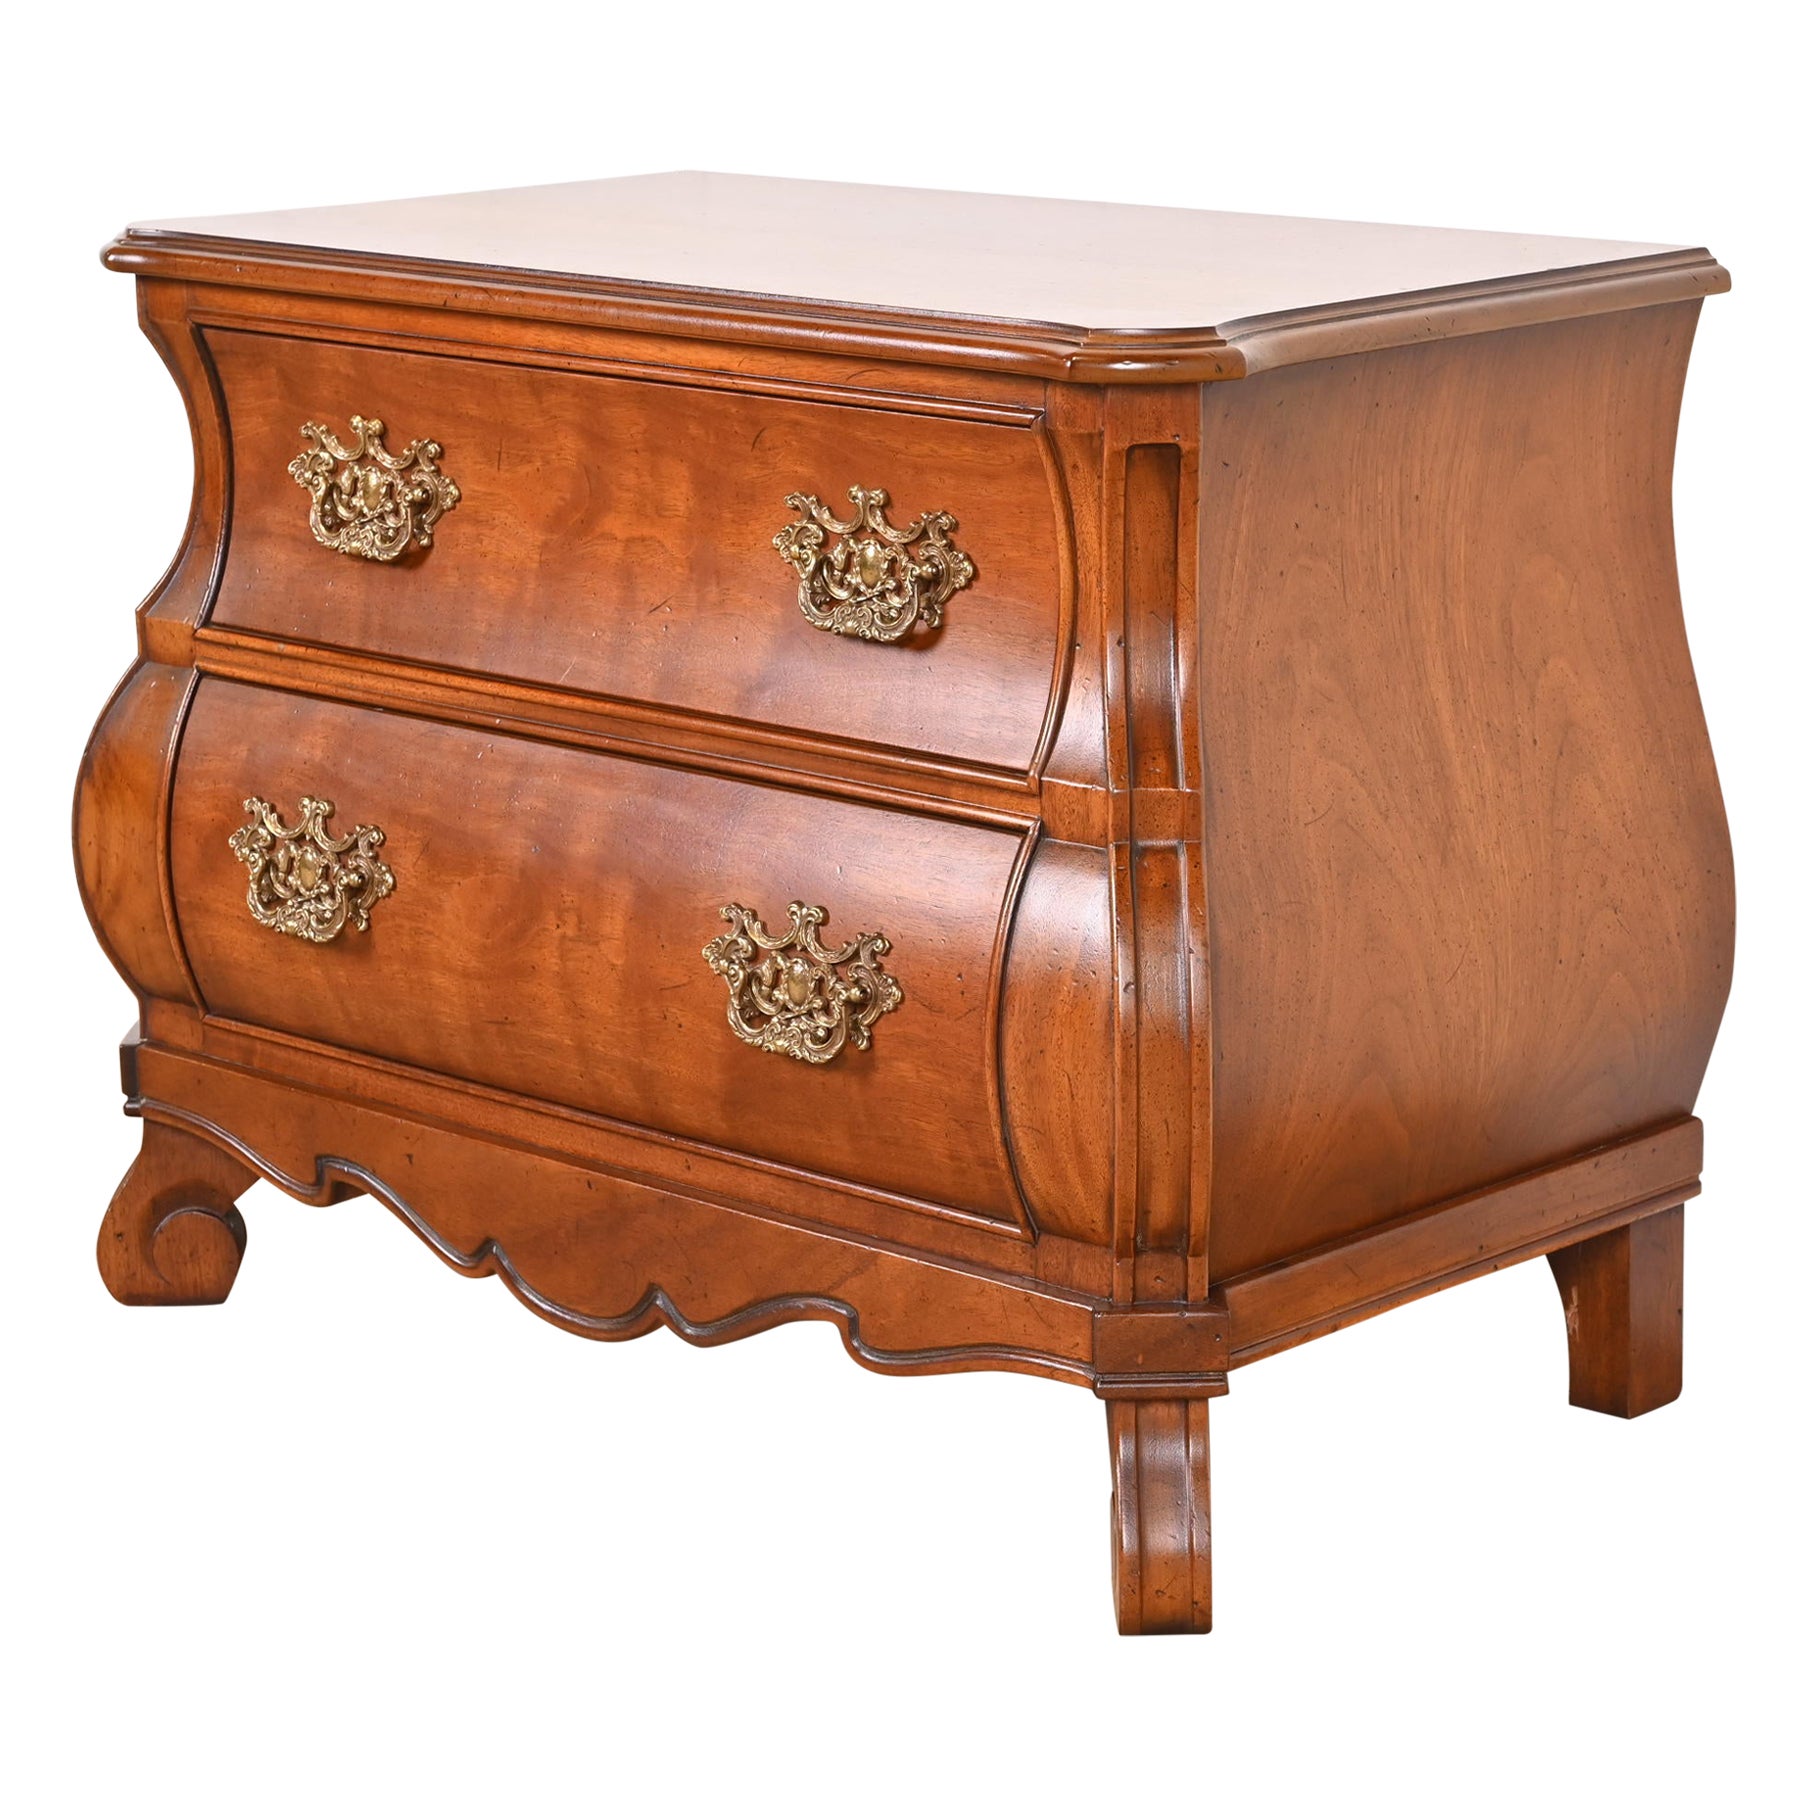 Henredon Italian Louis XV Cherry Wood Bombay Form Commode or Bedside Chest For Sale